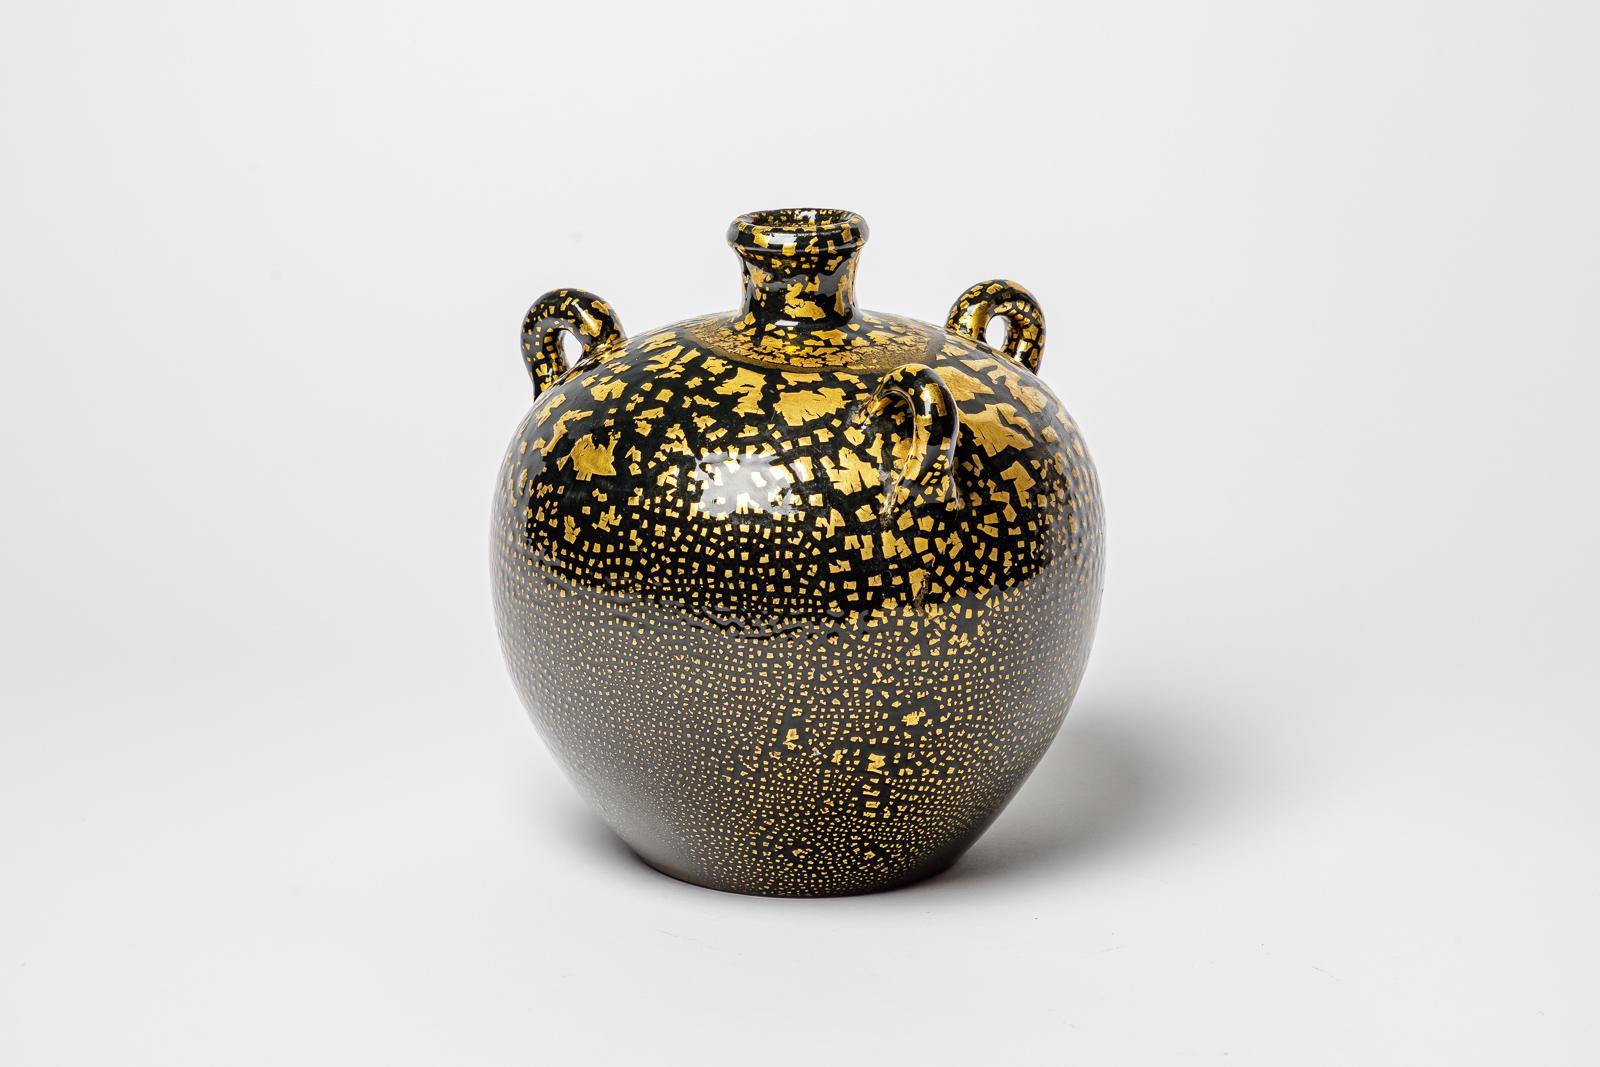 Black and gold glazed ceramic vase in the style of Jean Besnard.
Circa 1950-1960.
H : 10.6’ x 8.7’ inches.